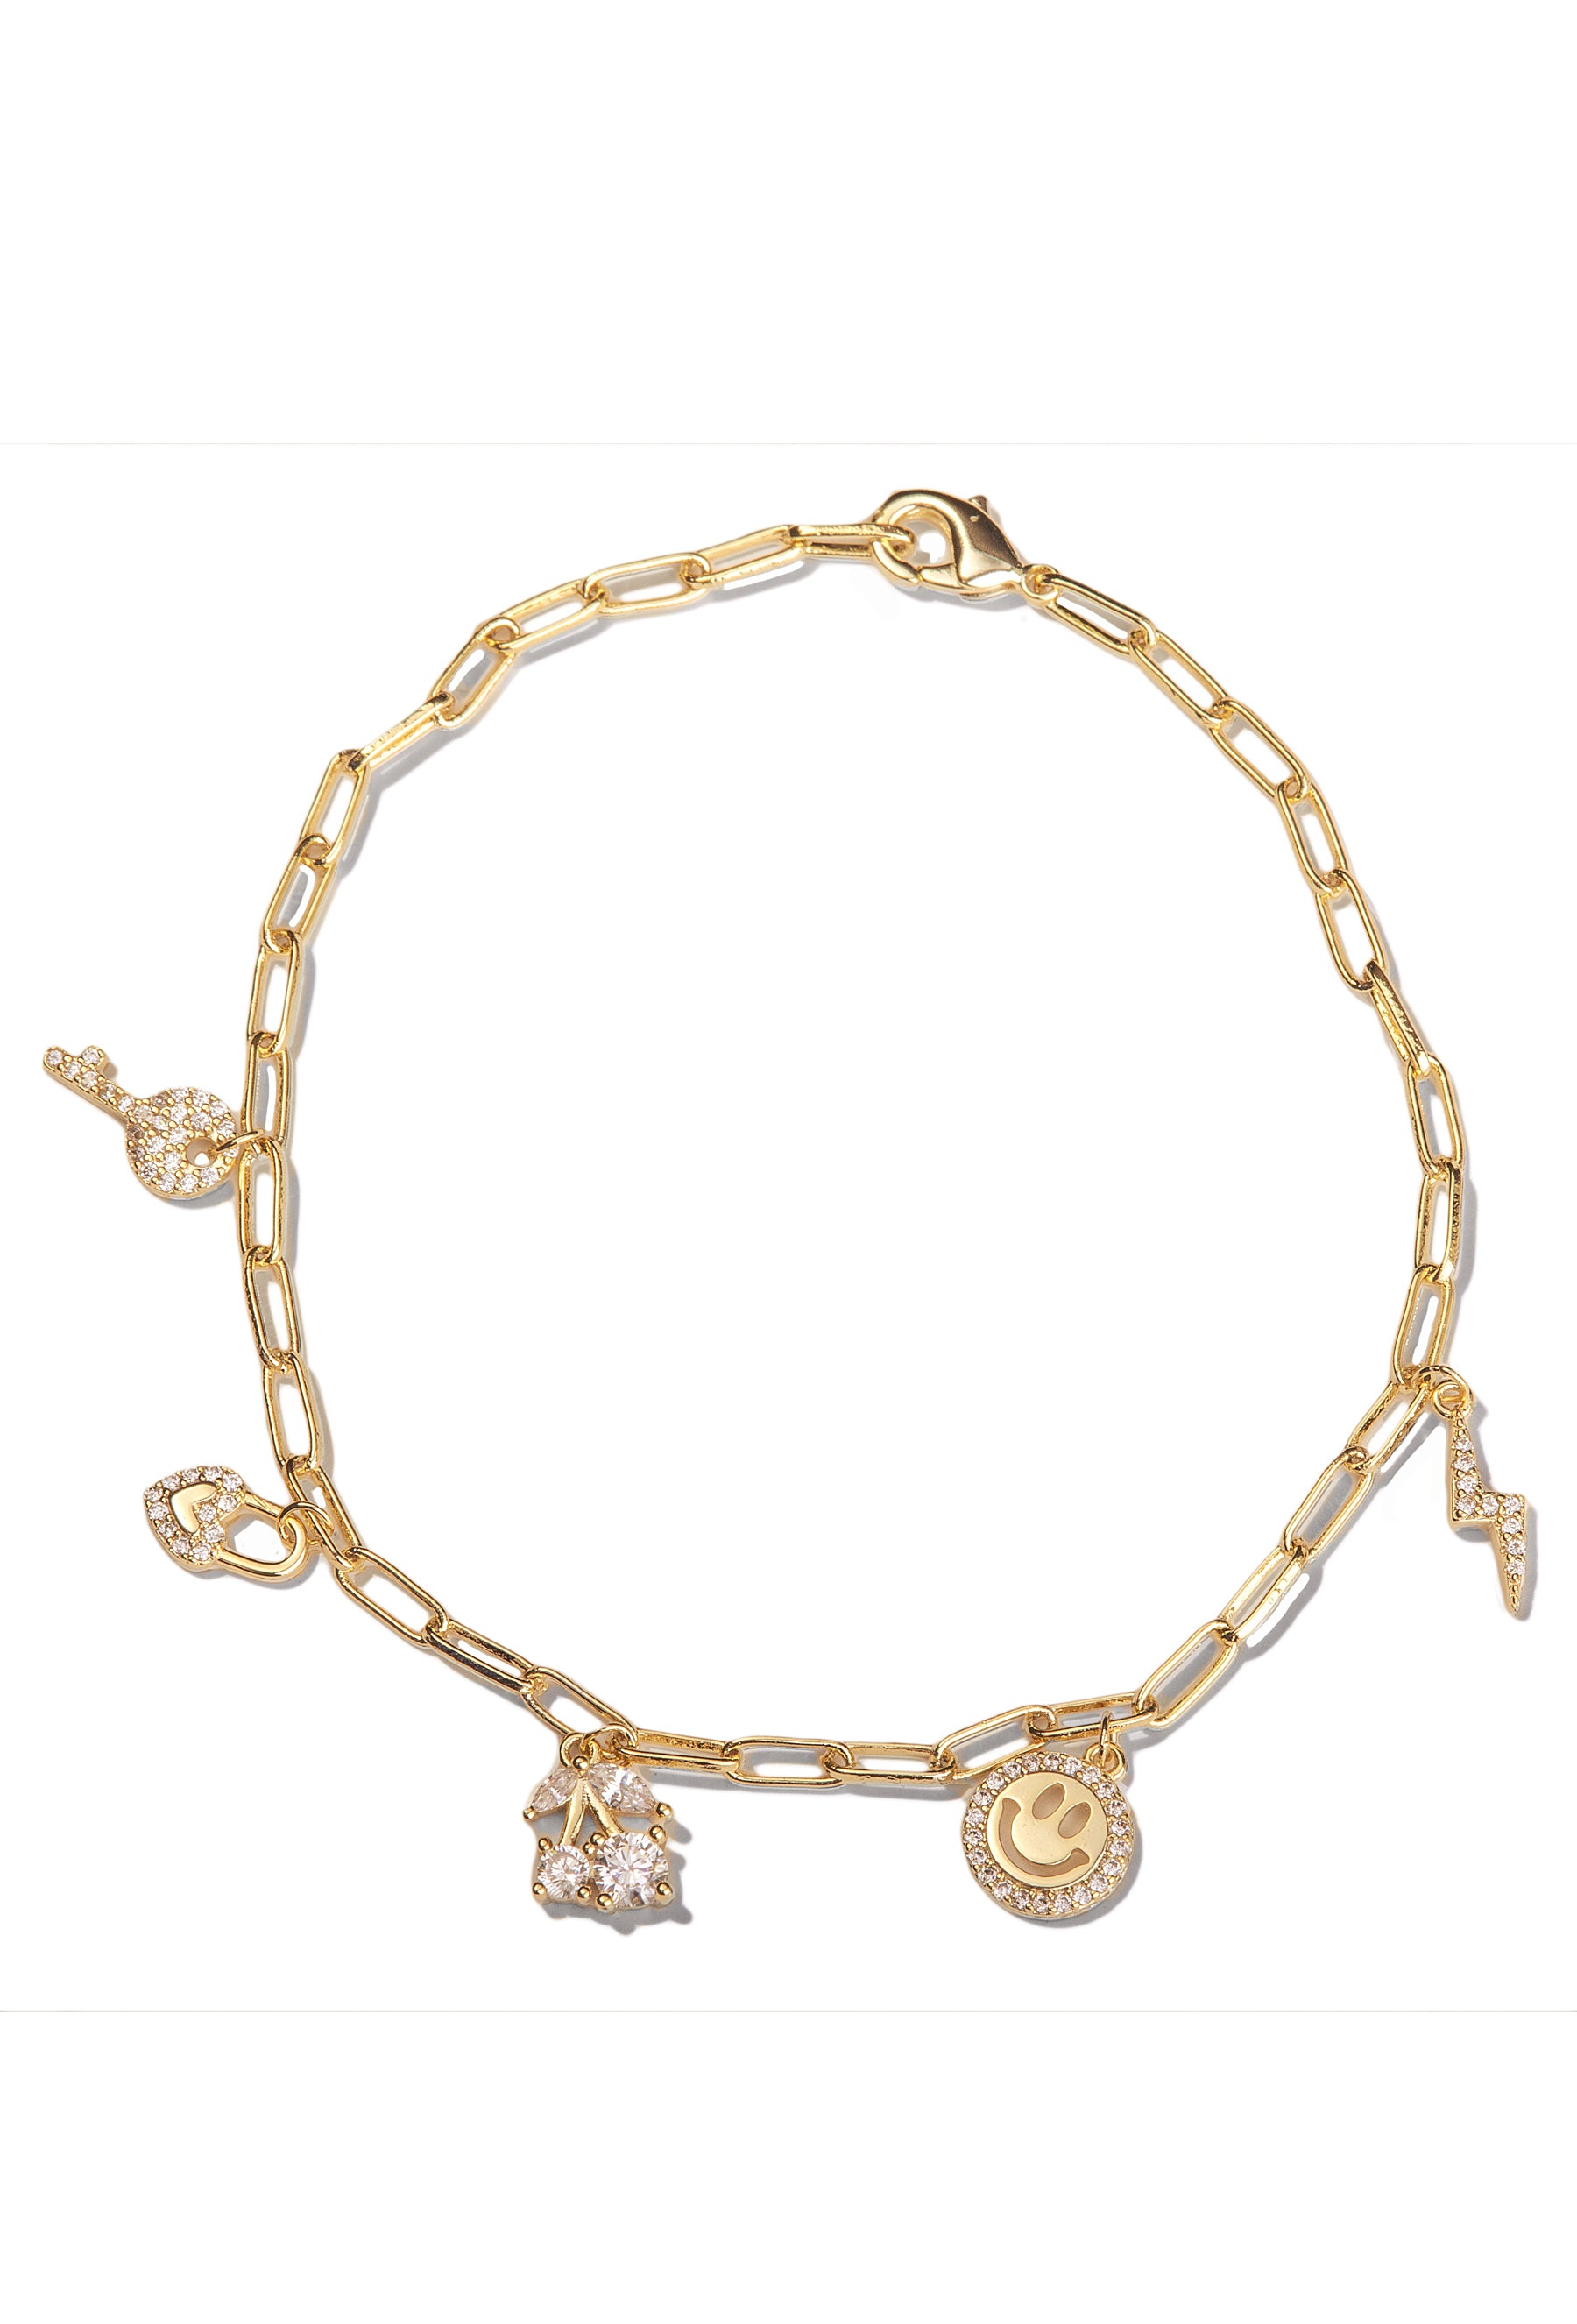 Bestie by Oomiay Assorted Gold Charms Chain Bracelet